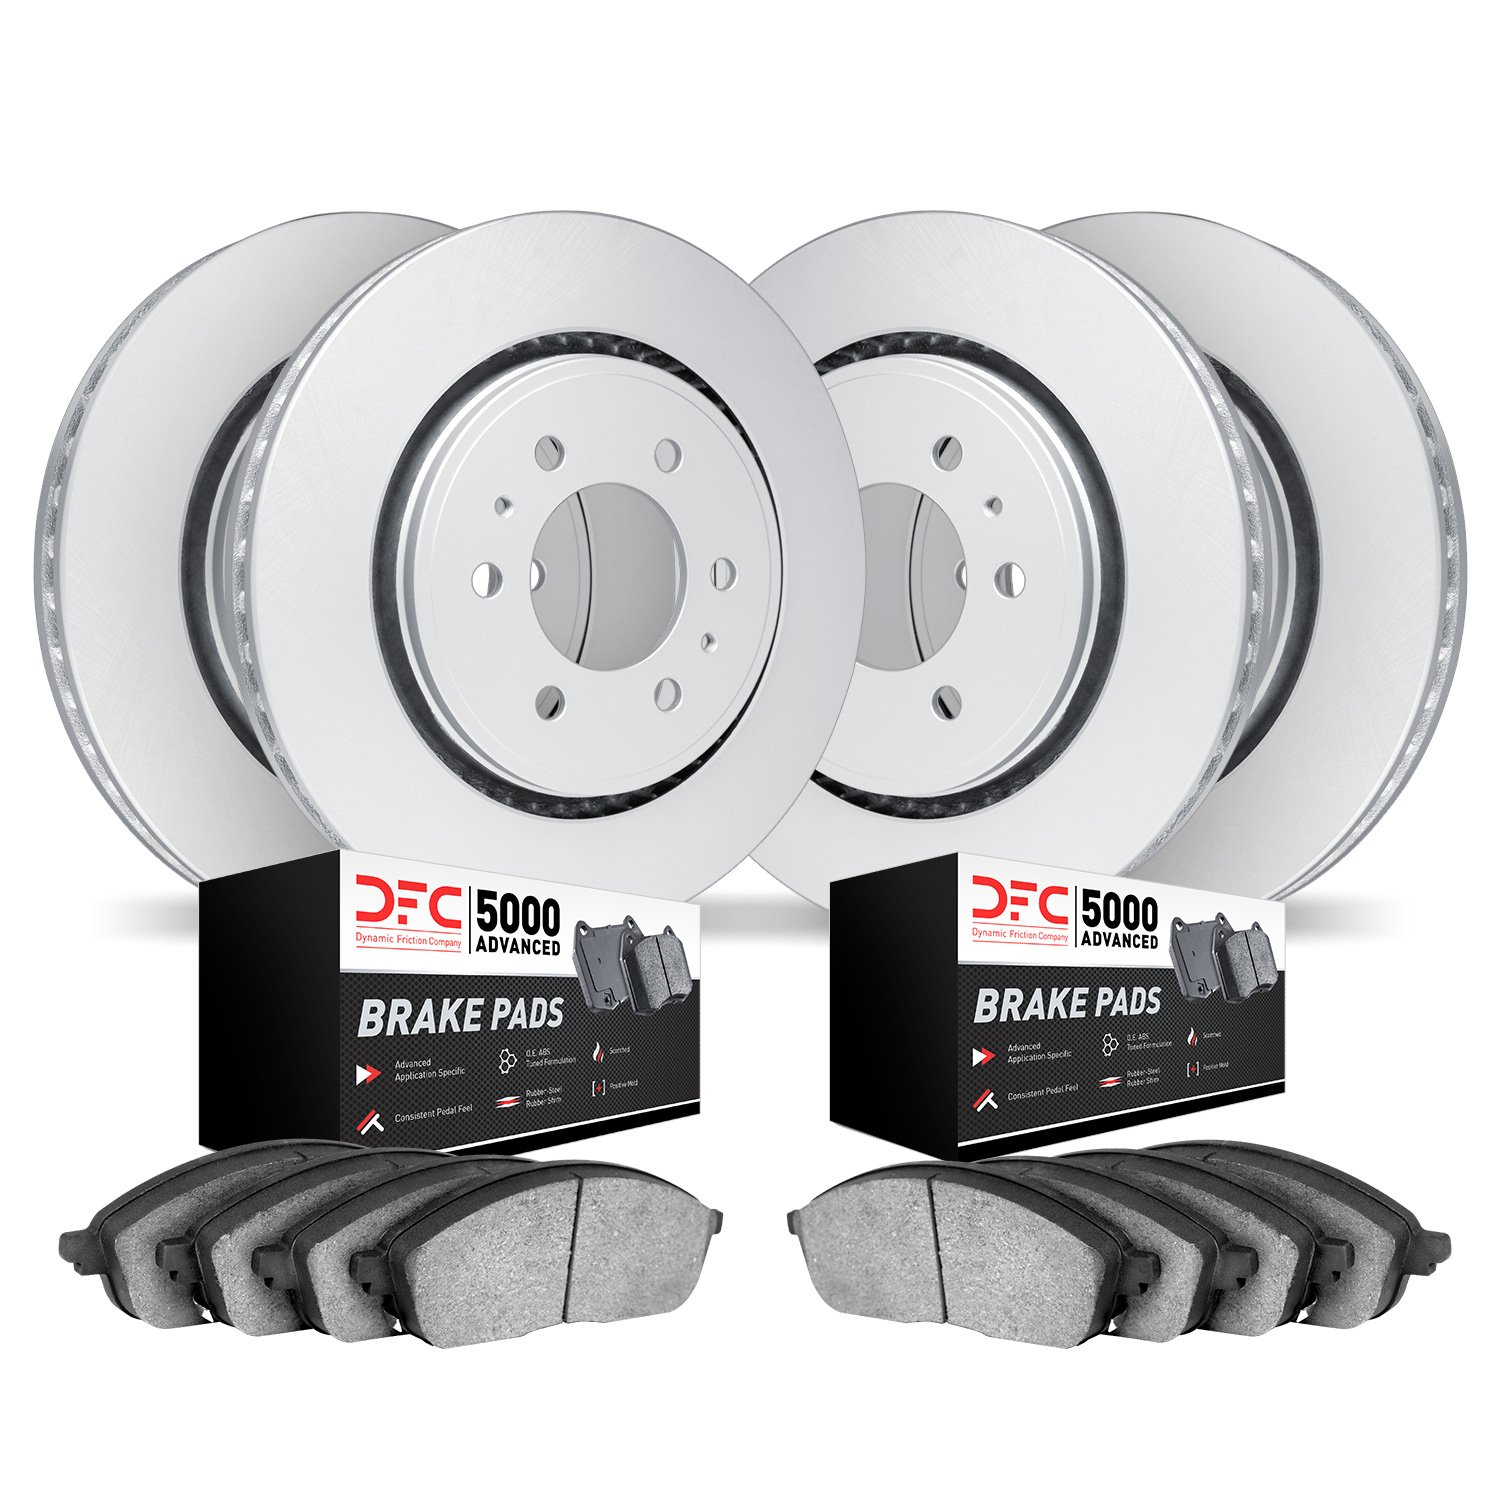 4504-46022 Geospec Brake Rotors w/5000 Advanced Brake Pads Kit, 2010-2016 GM, Position: Front and Rear